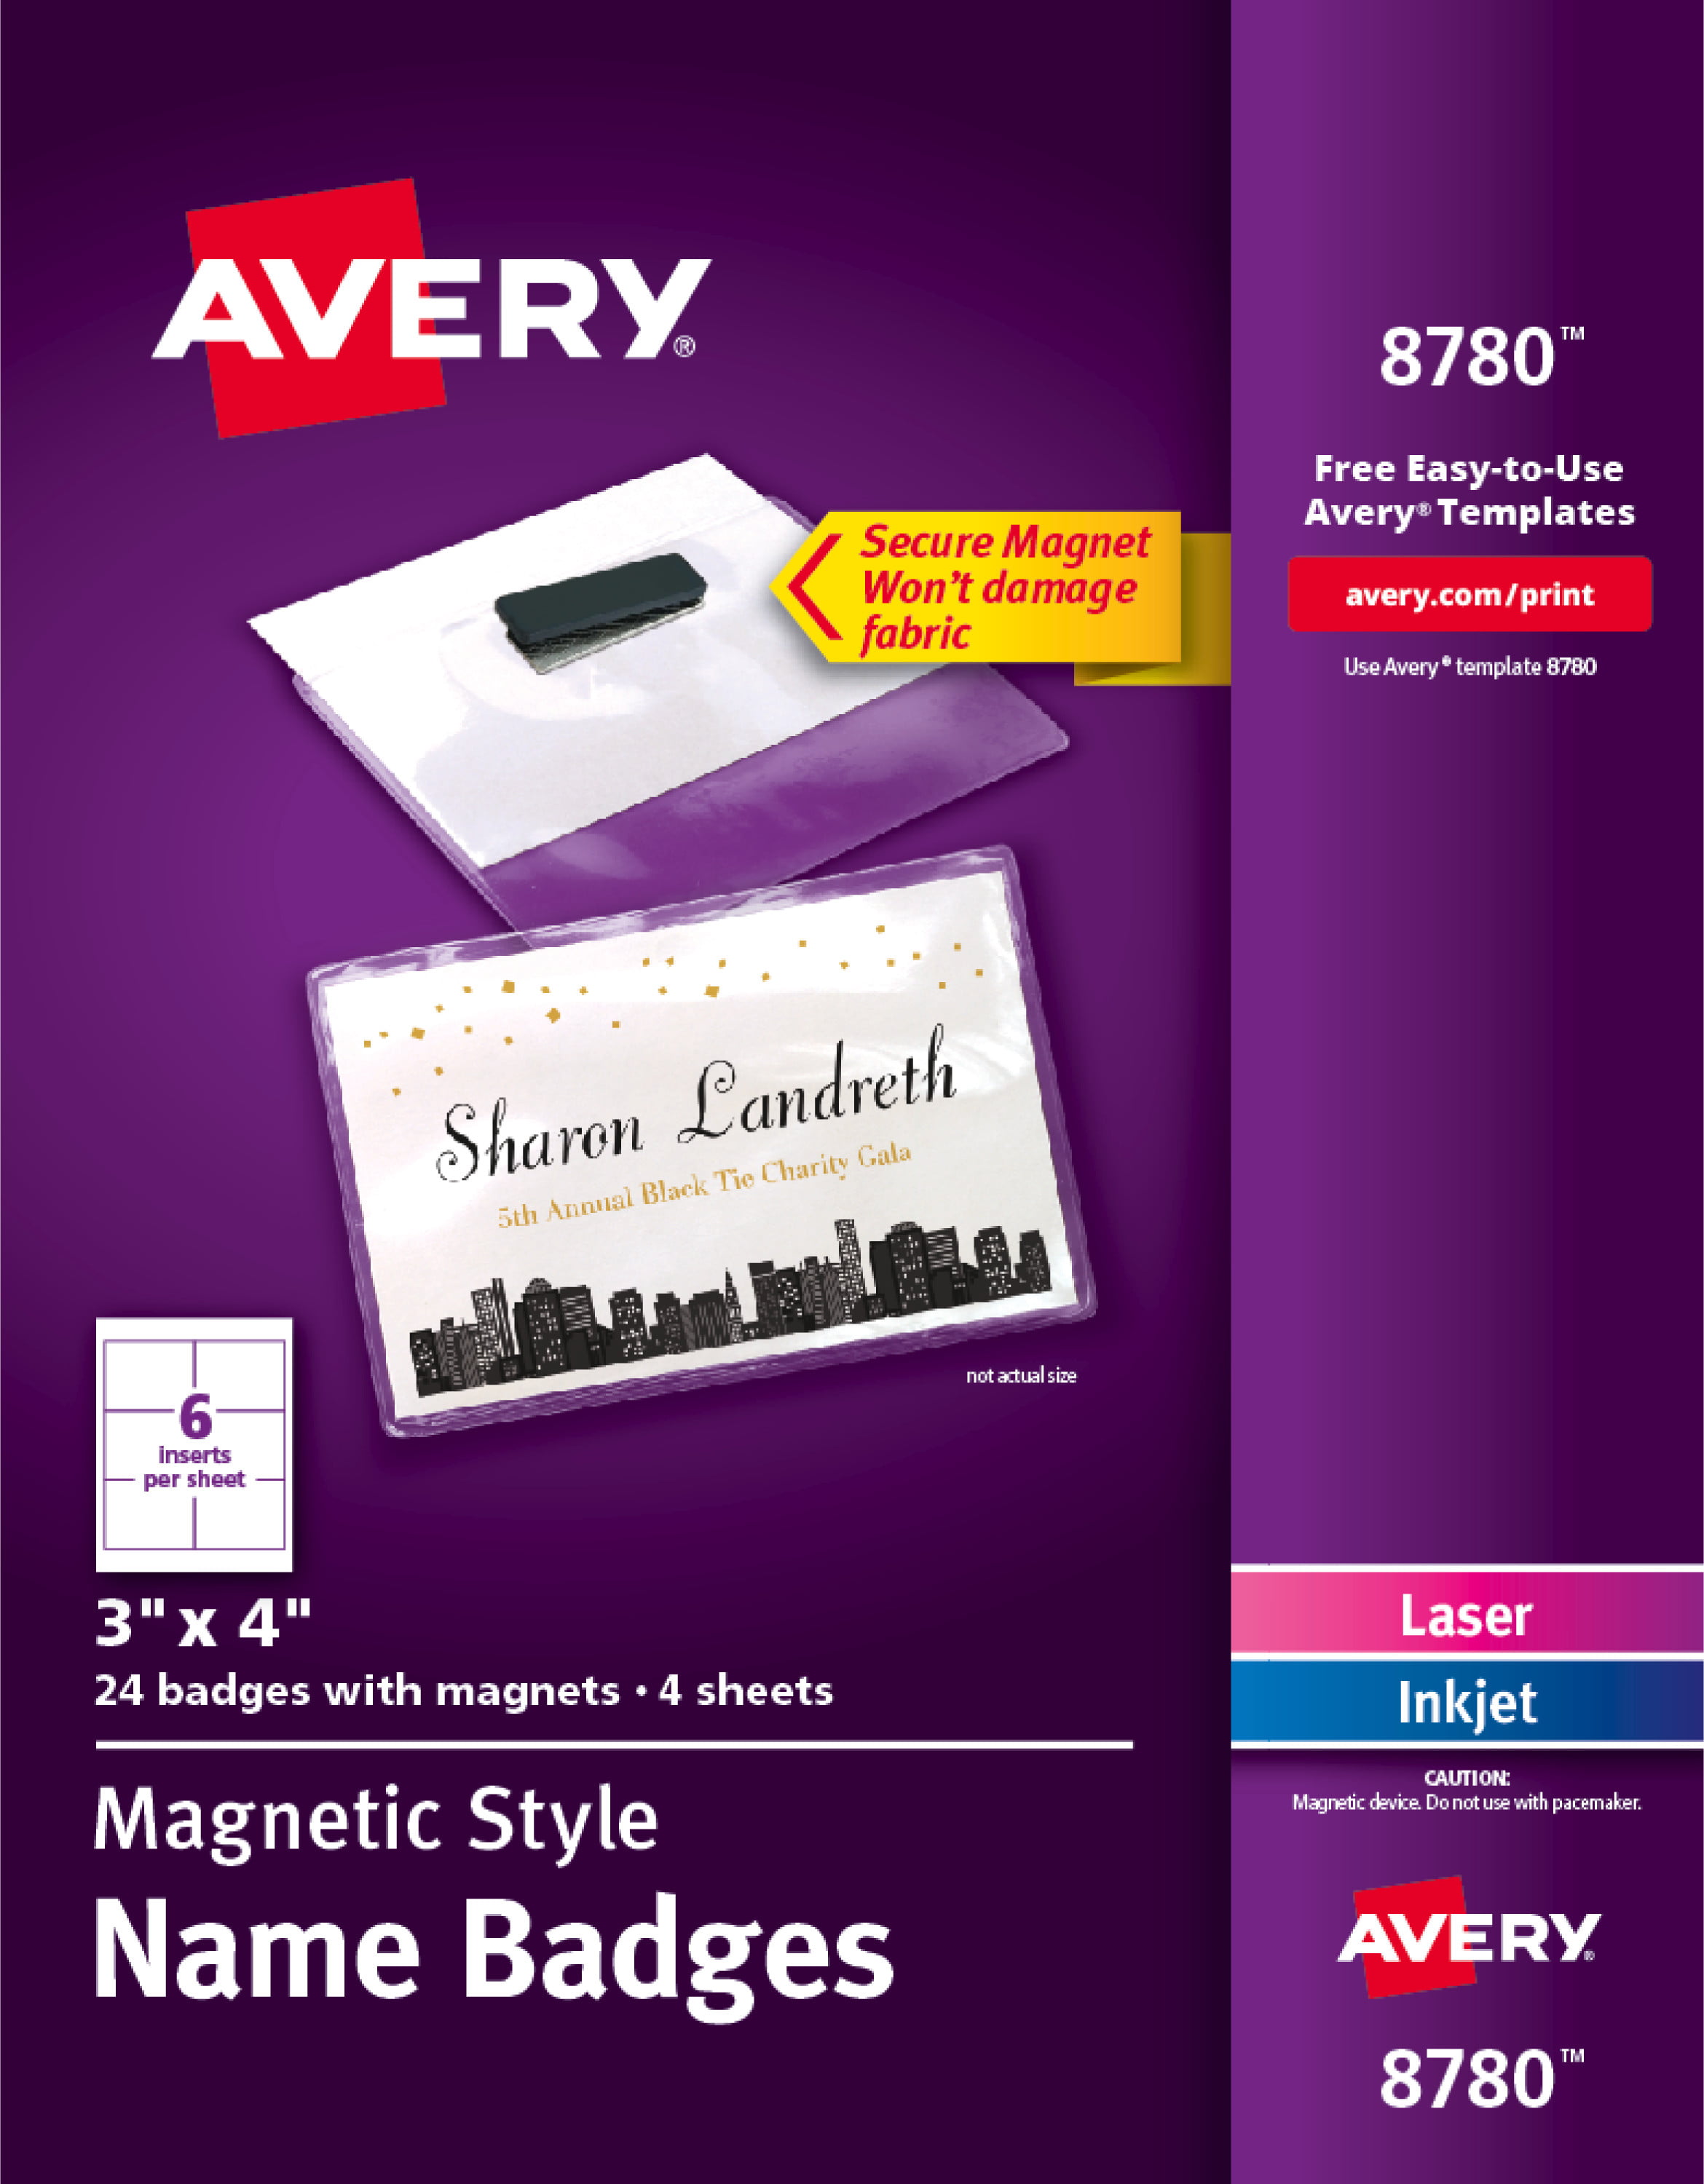 Avery 8780 Template